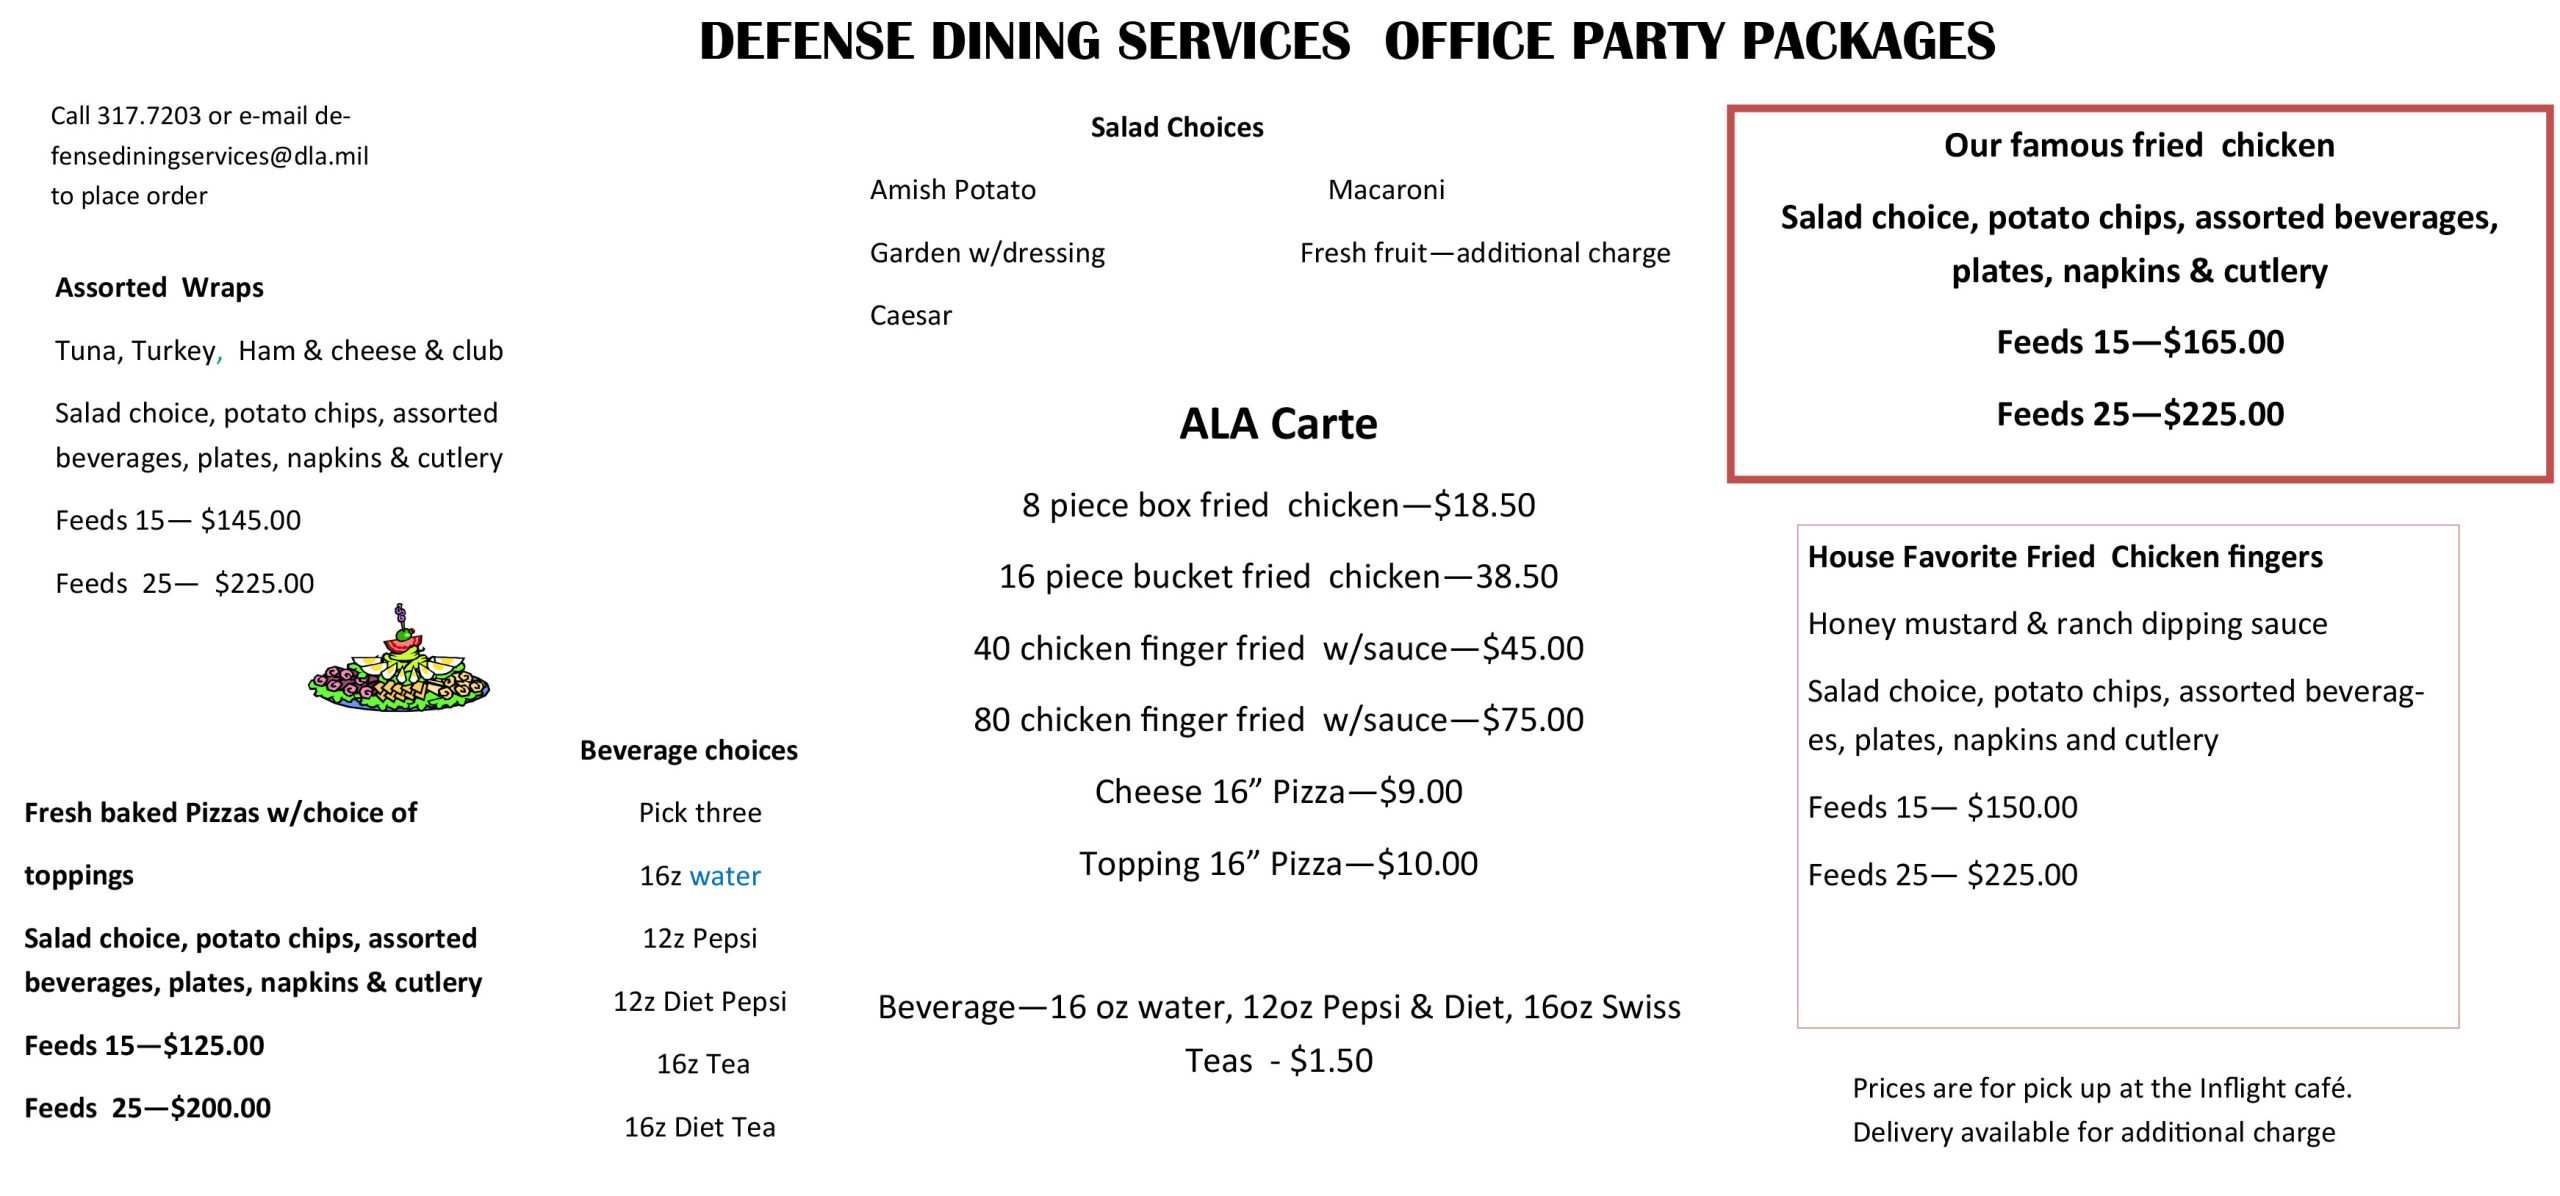 Inflight Catering: Defense Dining Services Office Party Packages